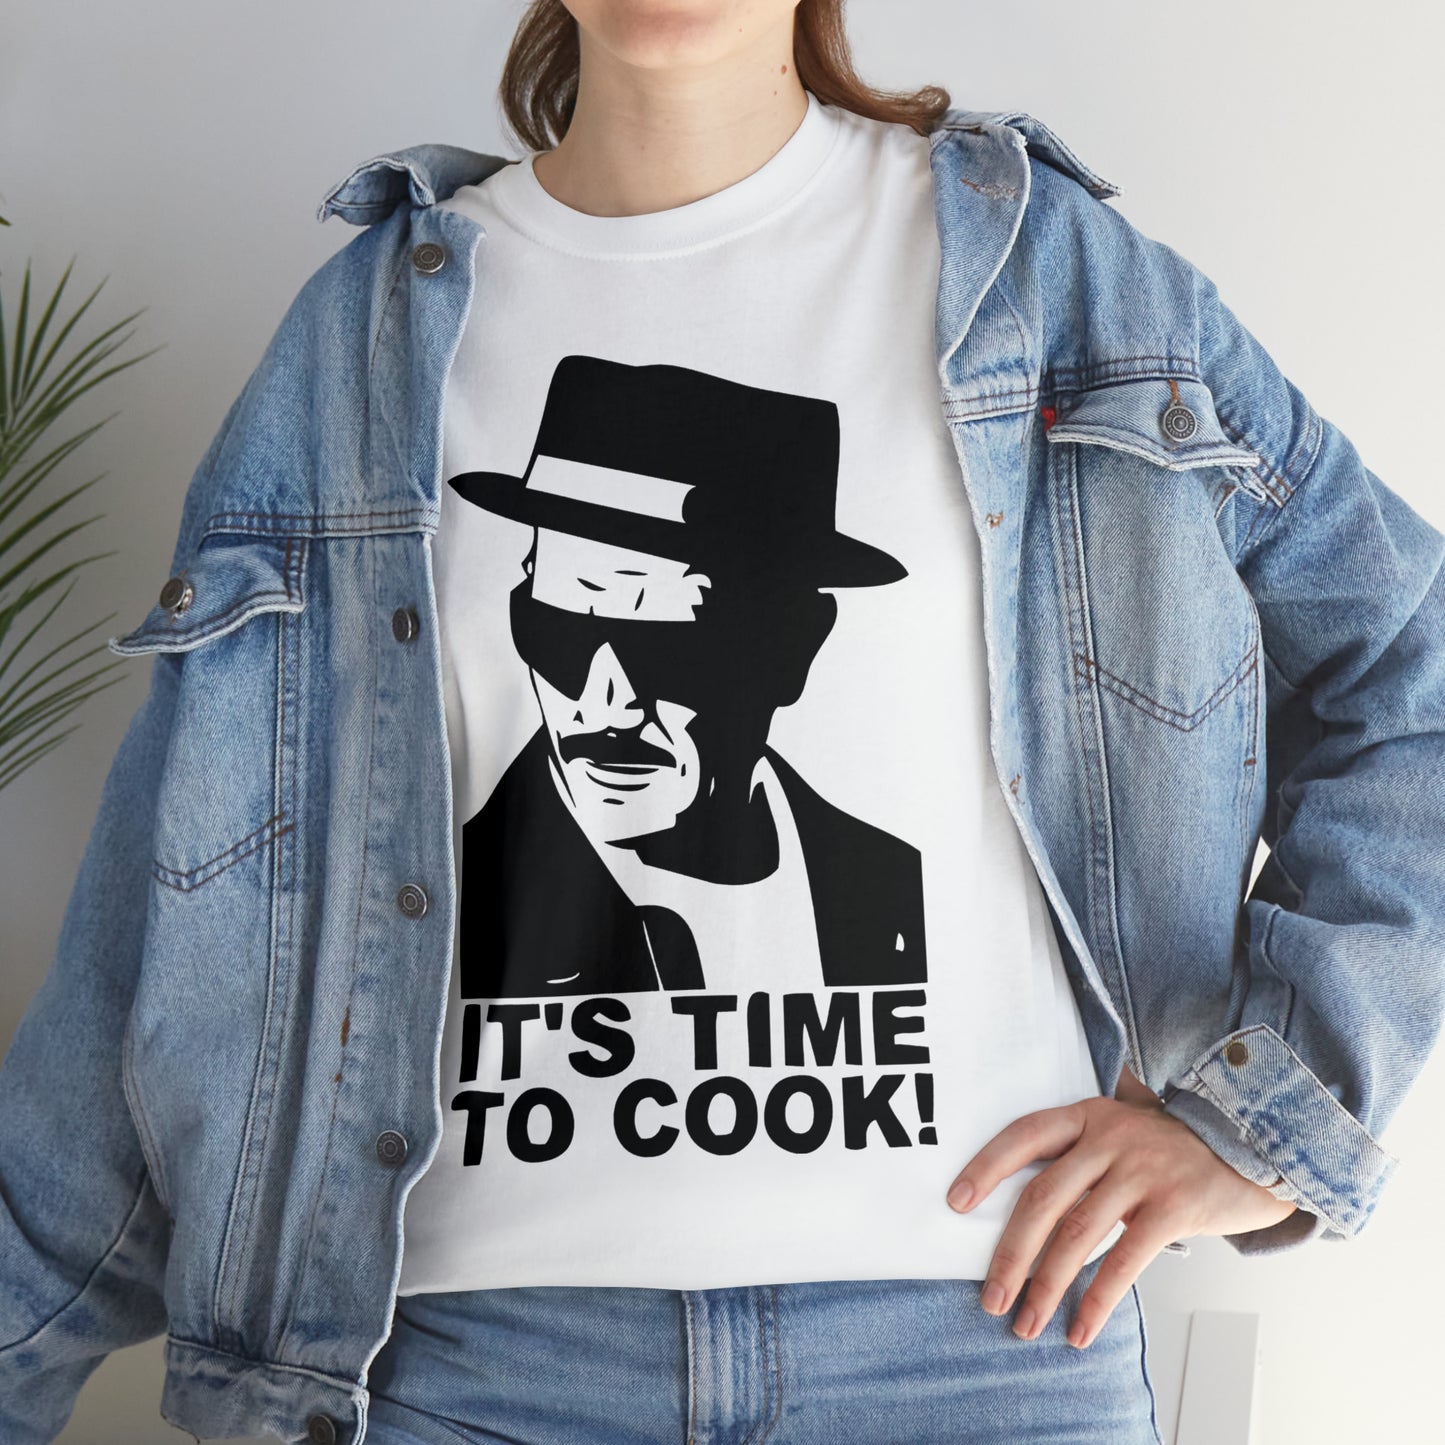 IT’S TIME TO COOK